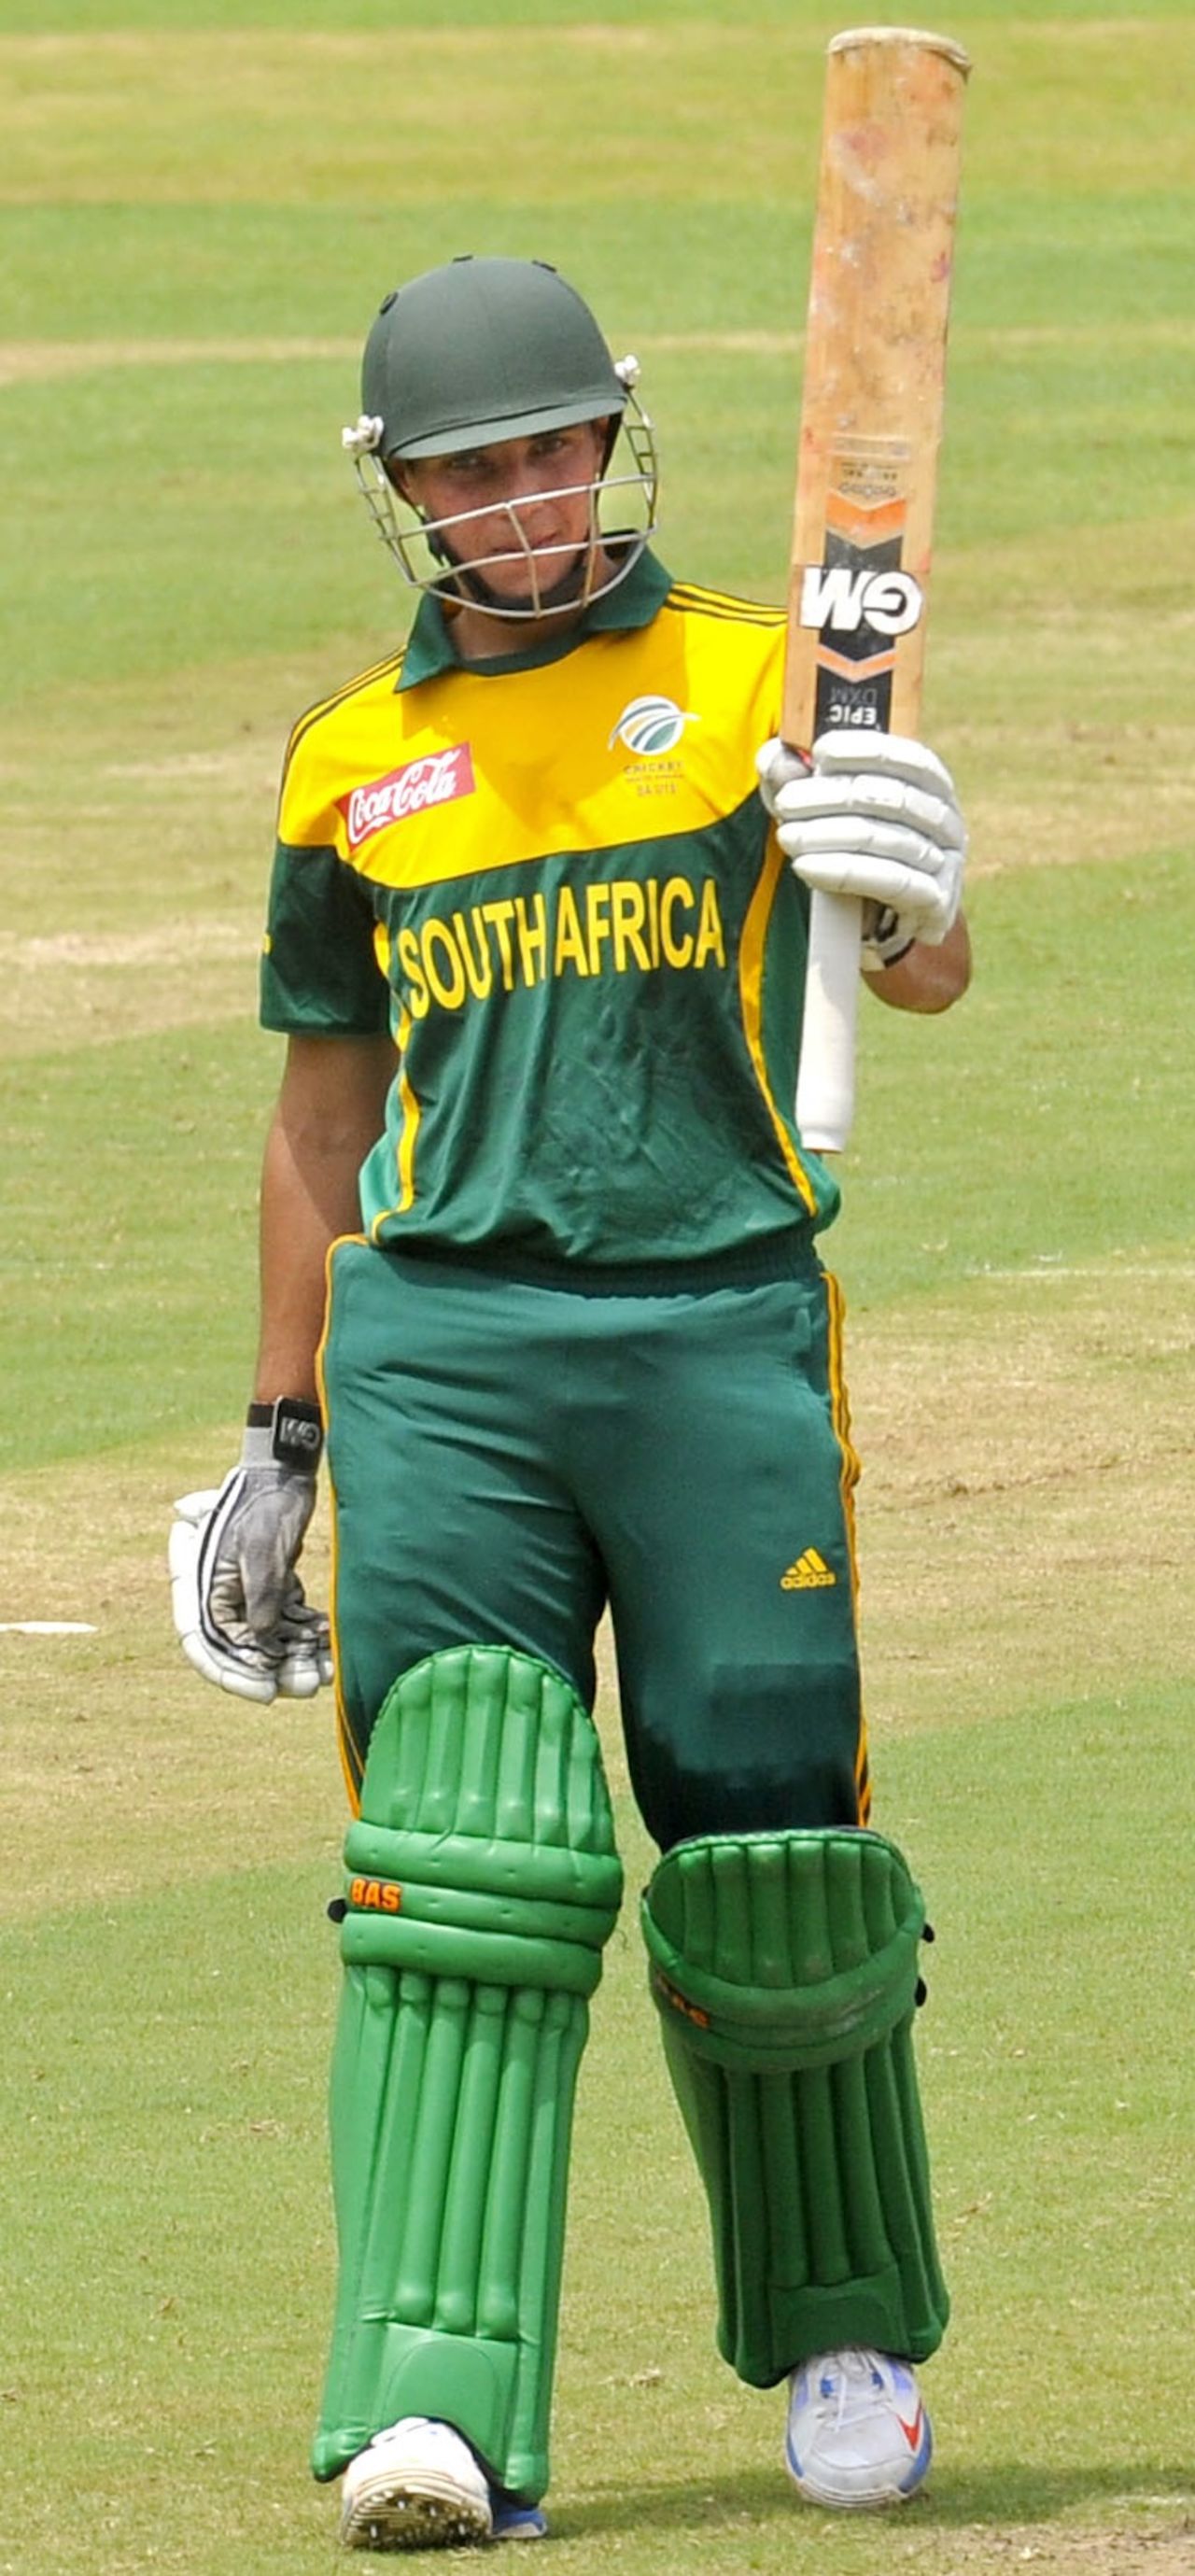 Yaseen Valli's 64 helped South Africa put on a strong score, India Under-19s v South Africa Under-19s, Visakhapatnam, October 1, 2013 